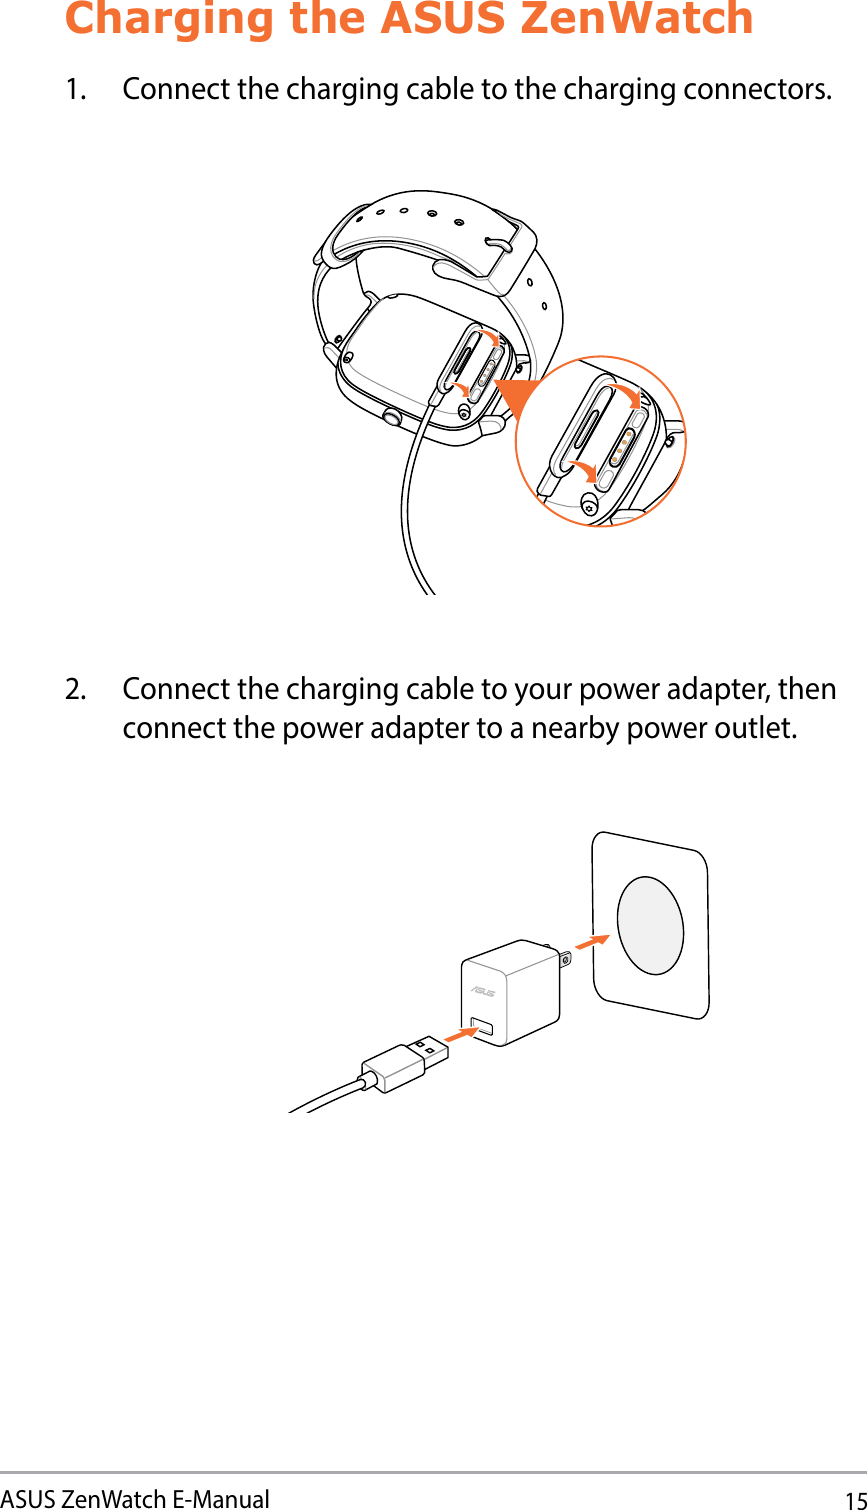 15ASUS ZenWatch E-ManualCharging the ASUS ZenWatch1.  Connect the charging cable to the charging connectors.2.  Connect the charging cable to your power adapter, then connect the power adapter to a nearby power outlet.